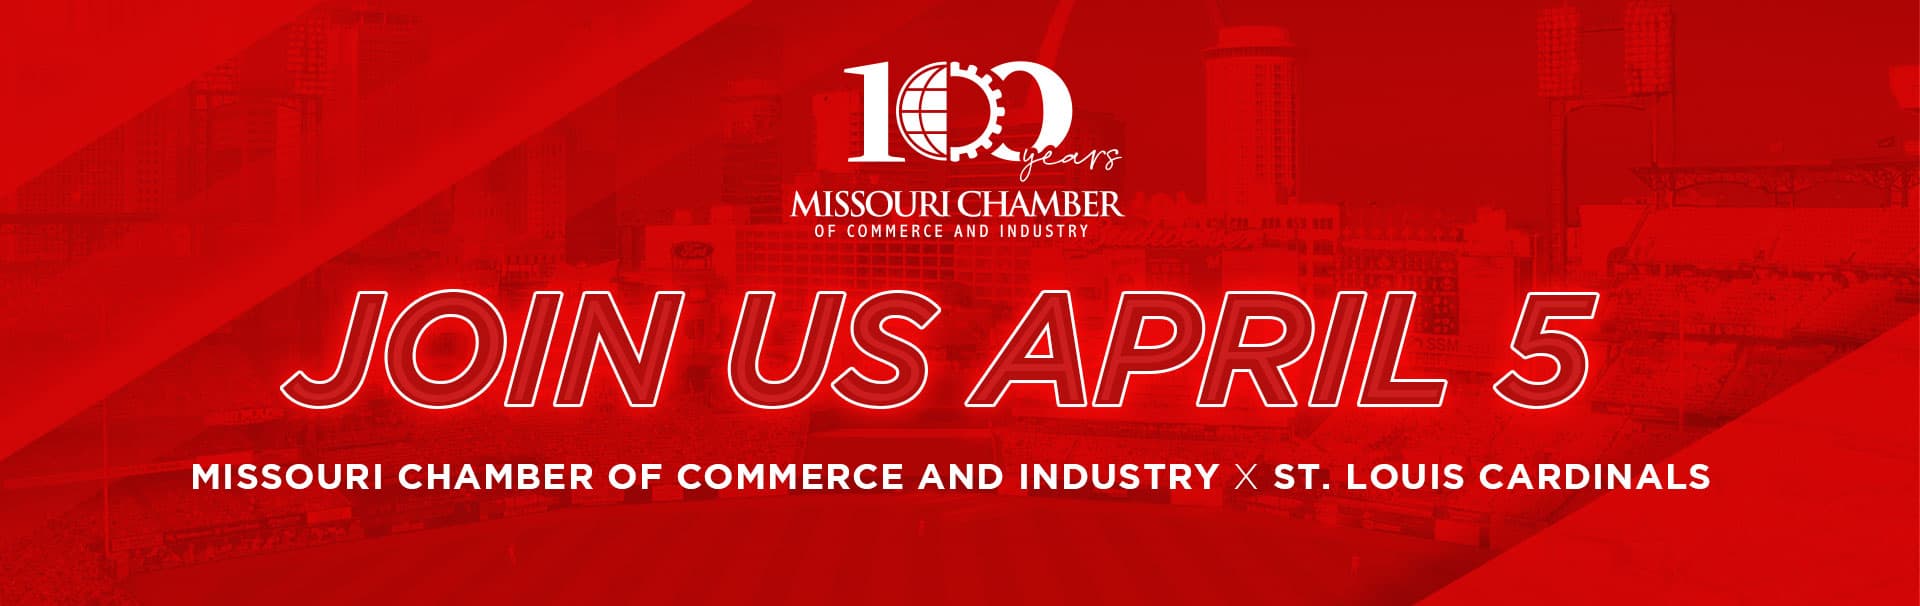 Join us April 5 Missouri Chamber of Commerce and Industry x St. Louis Cardinals